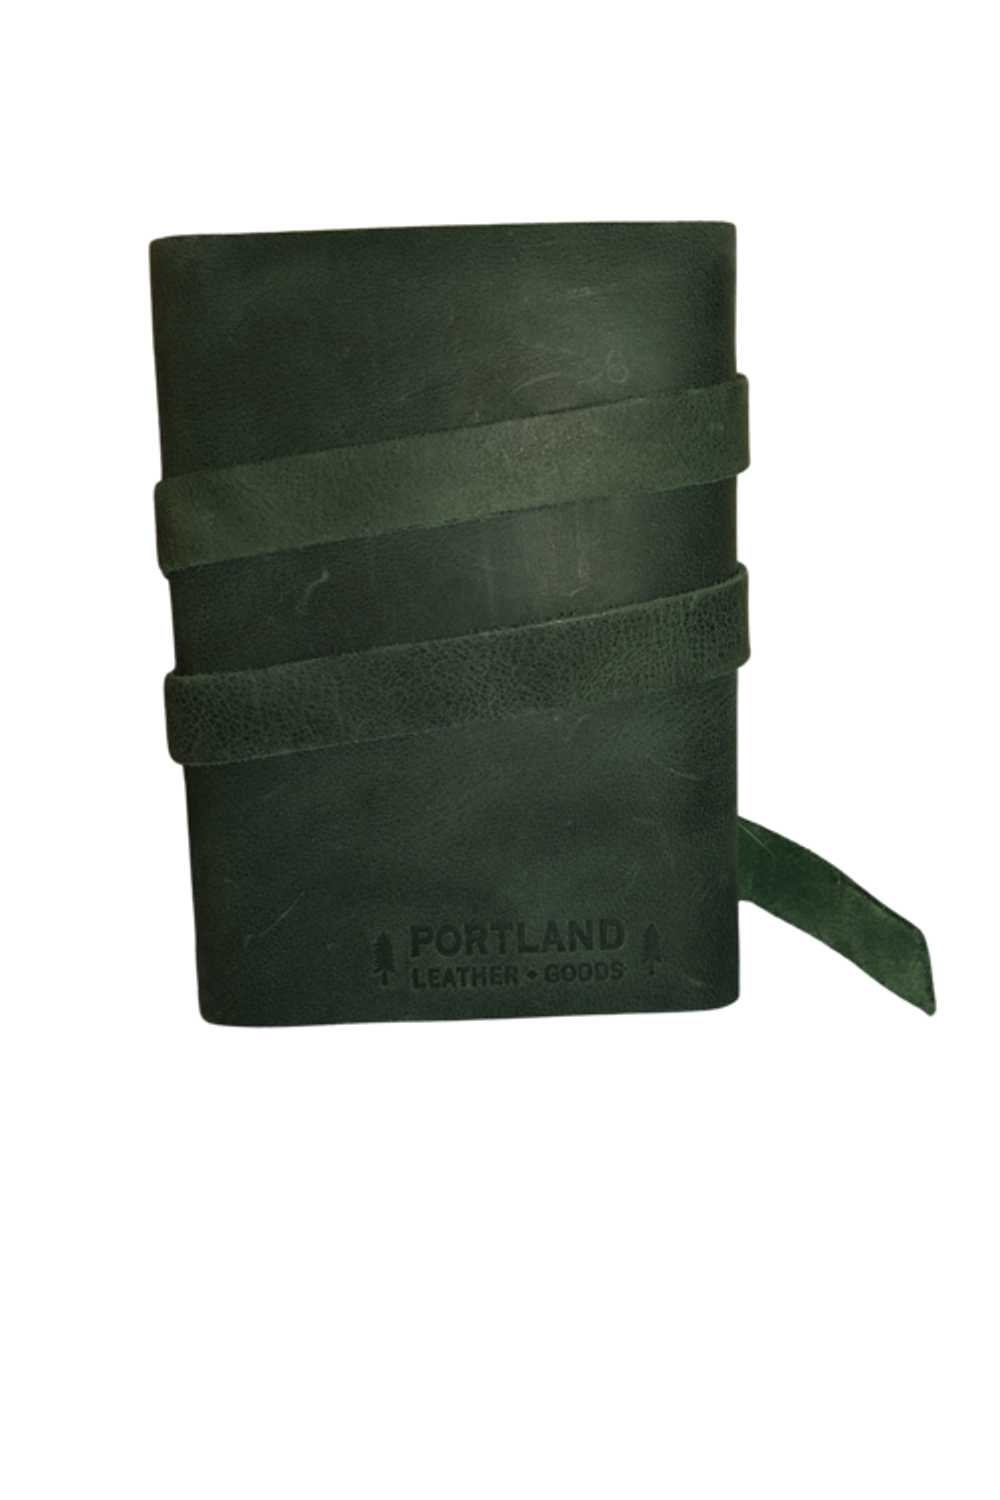 Portland Leather Leather Wrap Journal - image 2